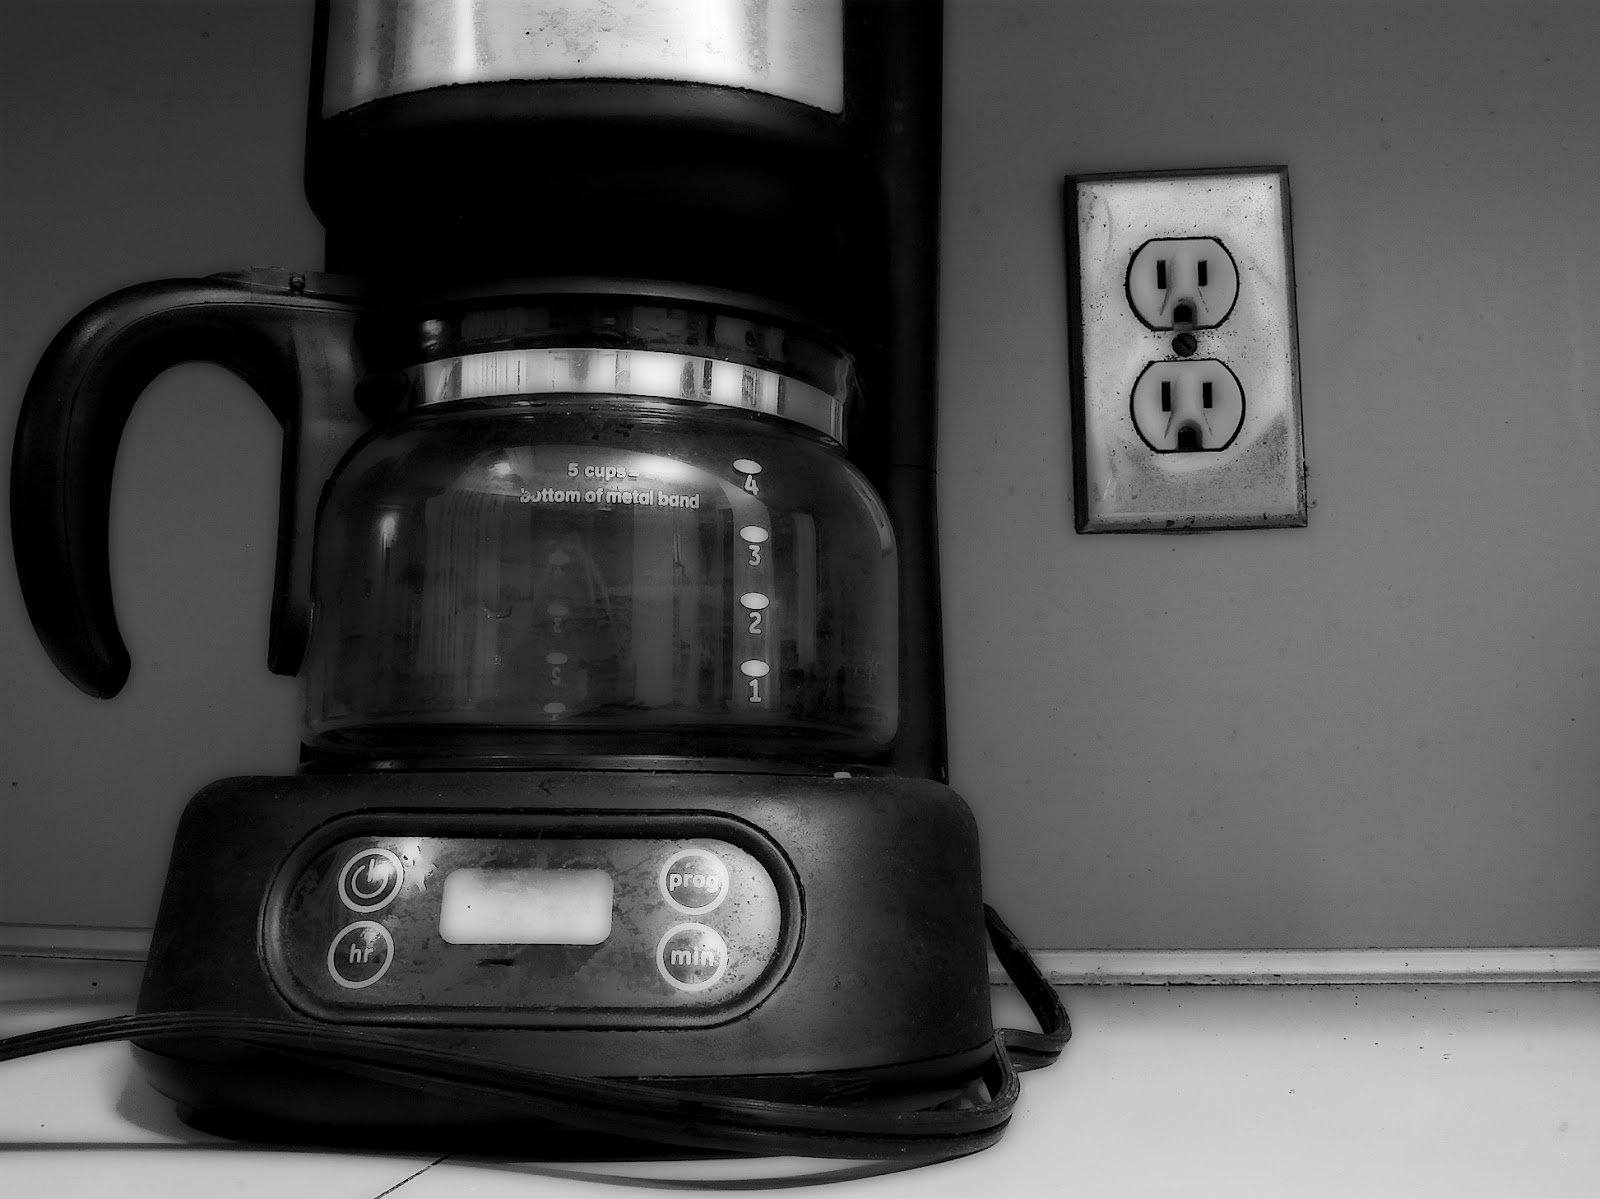 3 Reasons To Avoid Automatic Coffee Makers - JavaPresse Coffee Company